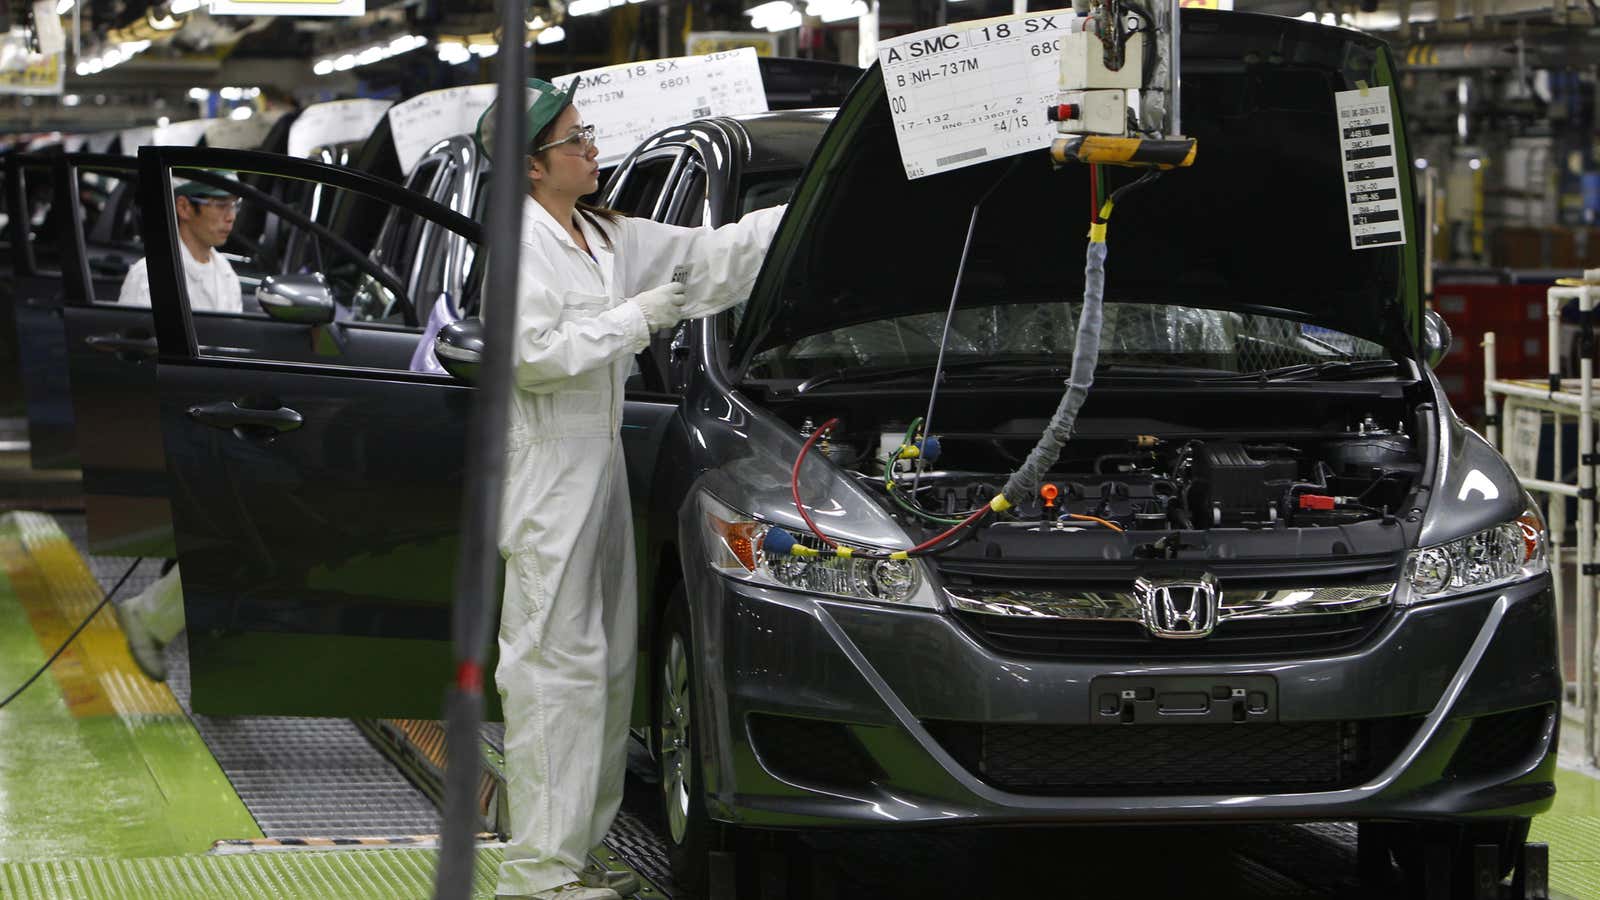 A cheaper yen could soon make more jobs like this possible in Japan.